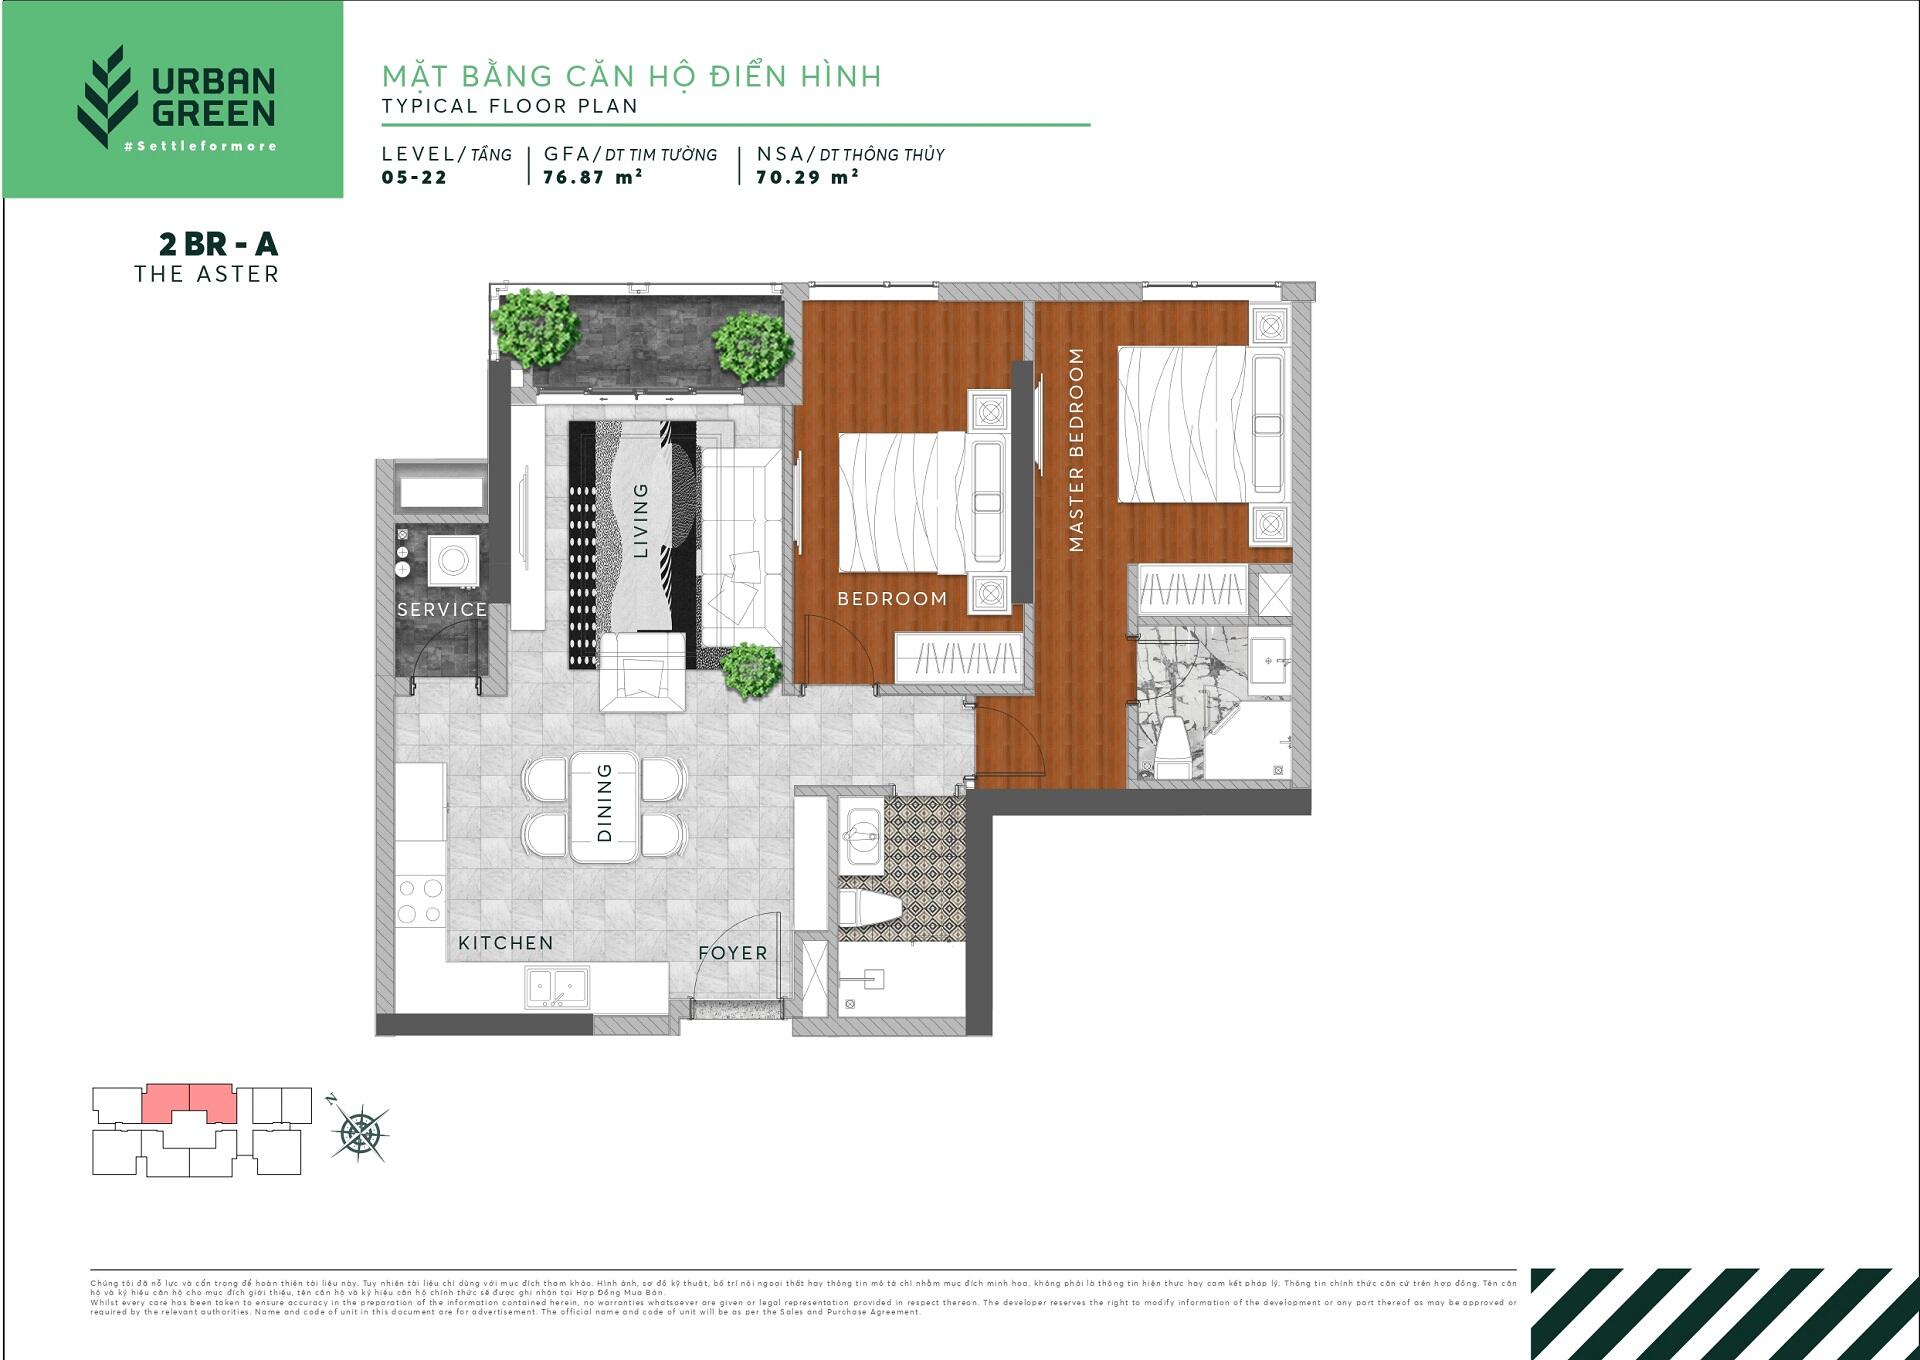 The layout of 2 bedroom apartment 2BR - A